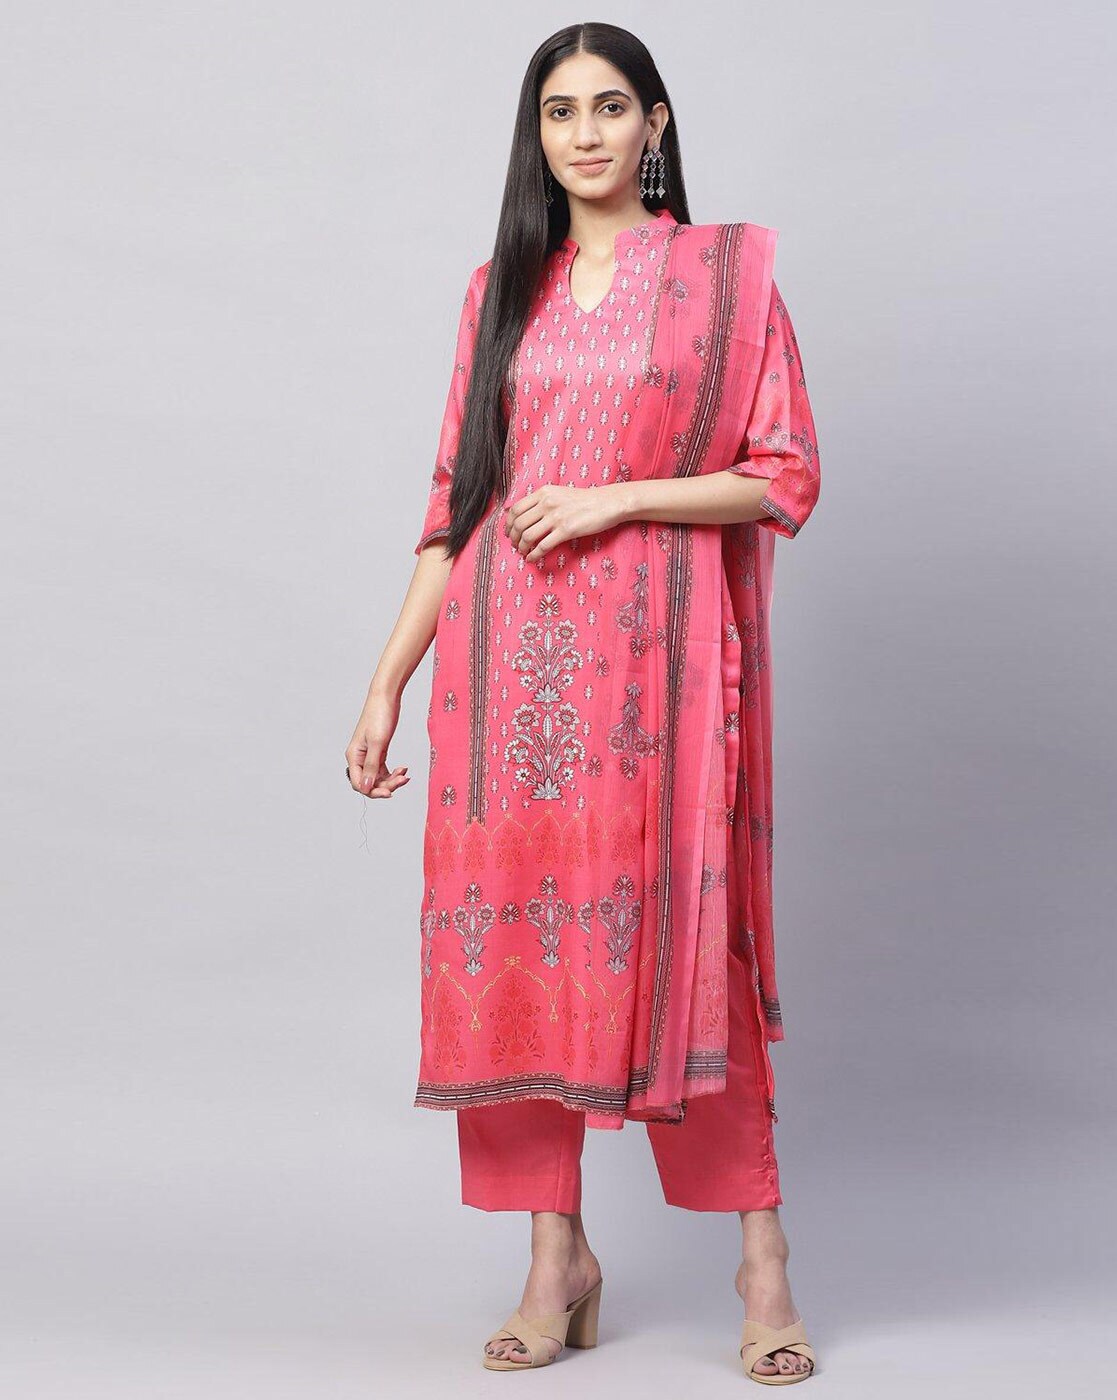 Biba Unstitched Salwar Suits Suit And Dupatta Tracksuits Dress Material -  Buy Biba Unstitched Salwar Suits Suit And Dupatta Tracksuits Dress Material  online in India